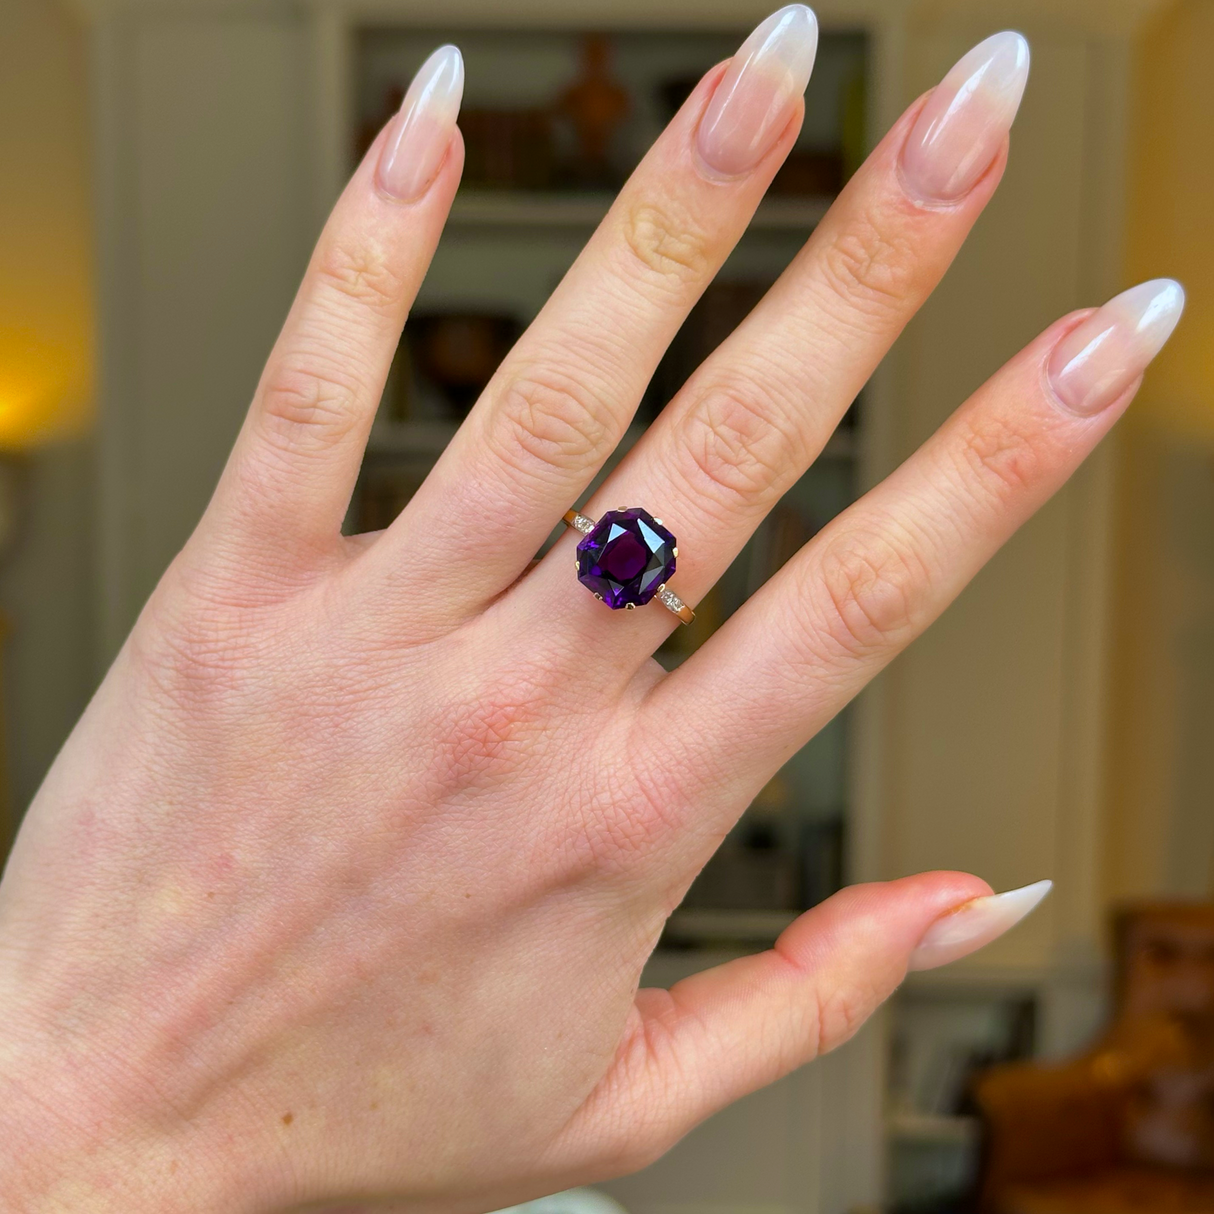 Antique, Edwardian Single stone Amethyst Ring, 18ct Yellow Gold and Platinum worn on hand.